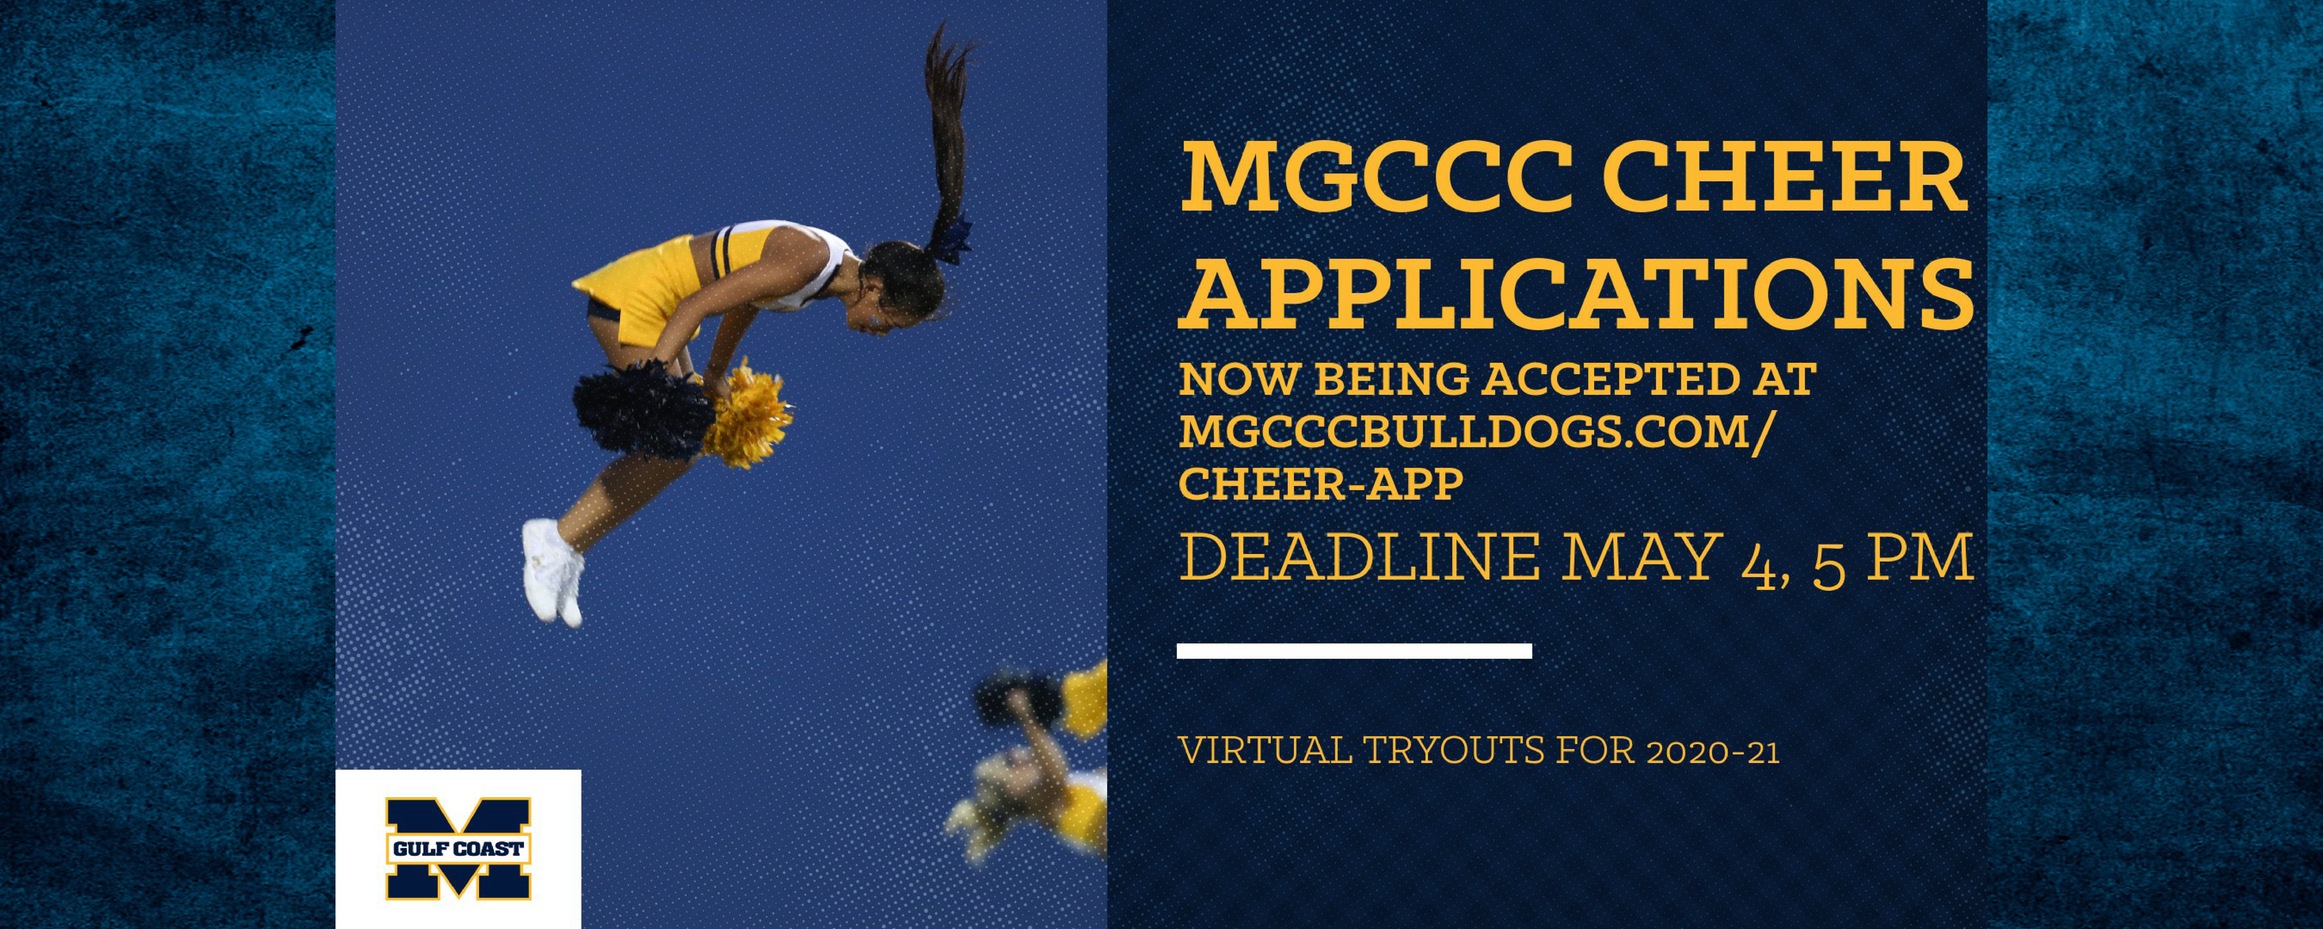 MGCCC Cheer tryout process now open online